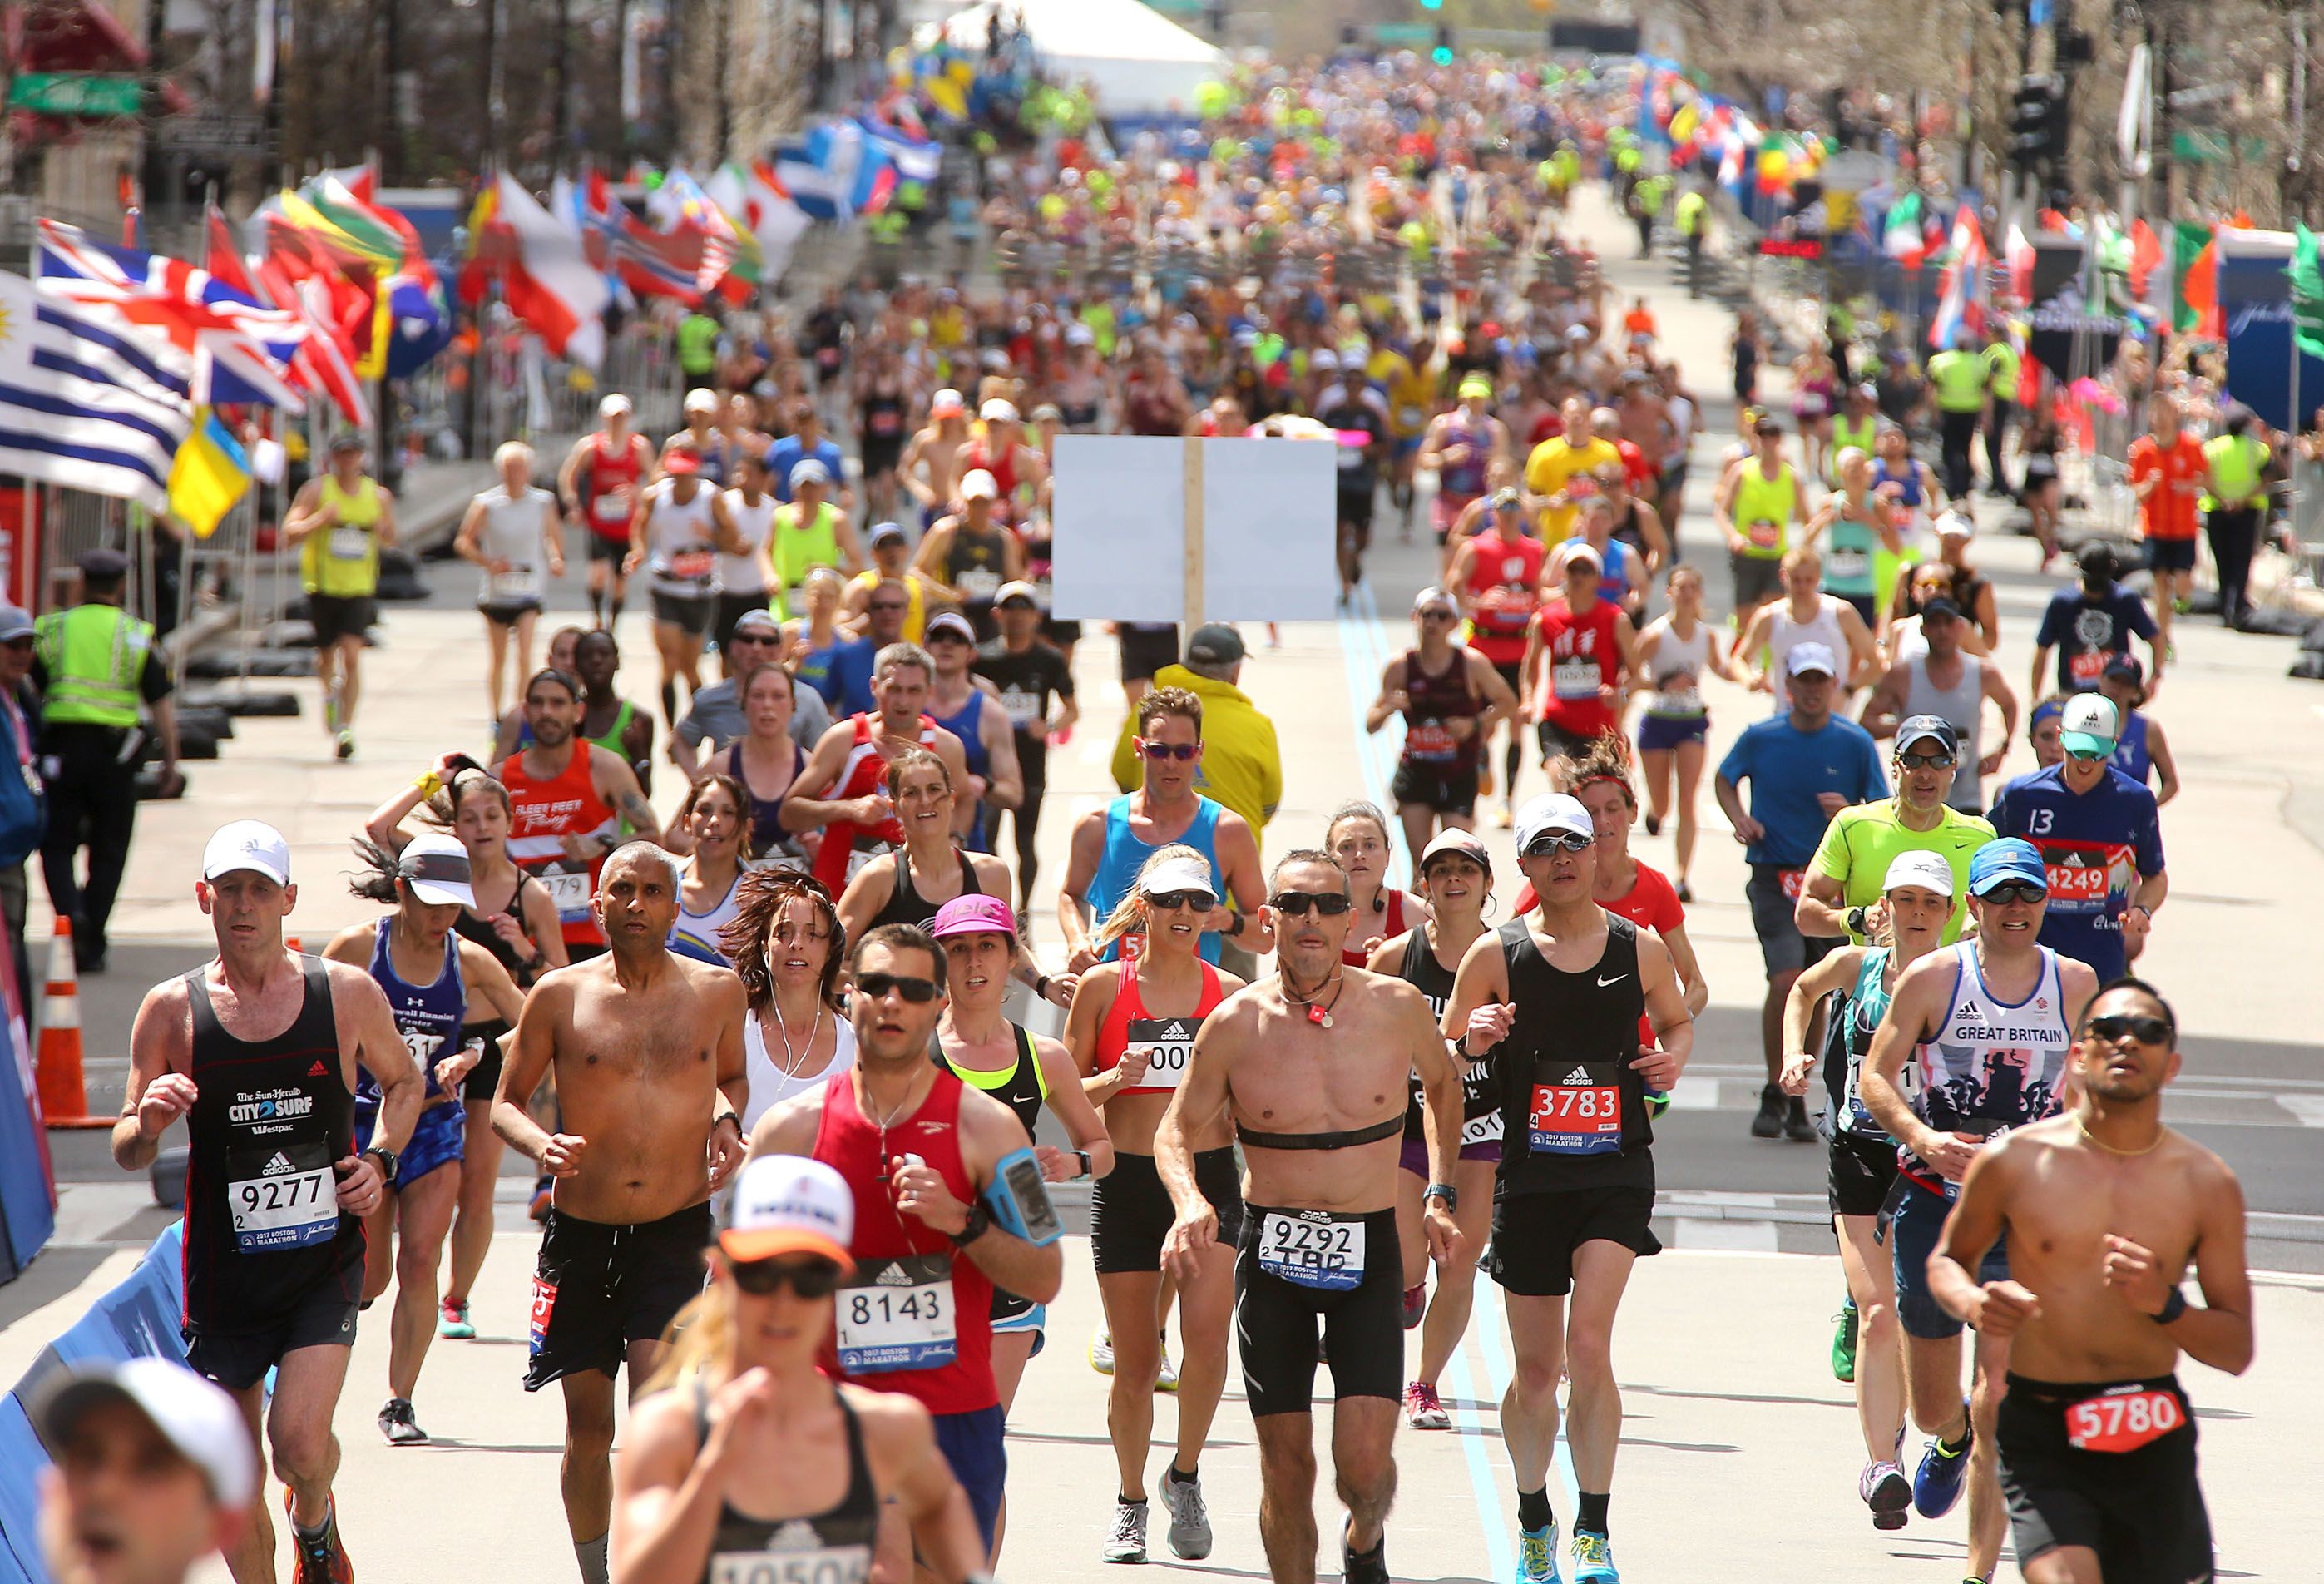 Plenty of runners are qualifying for the 2020 Boston Marathon even though the time standards are five minutes faster across all age groups